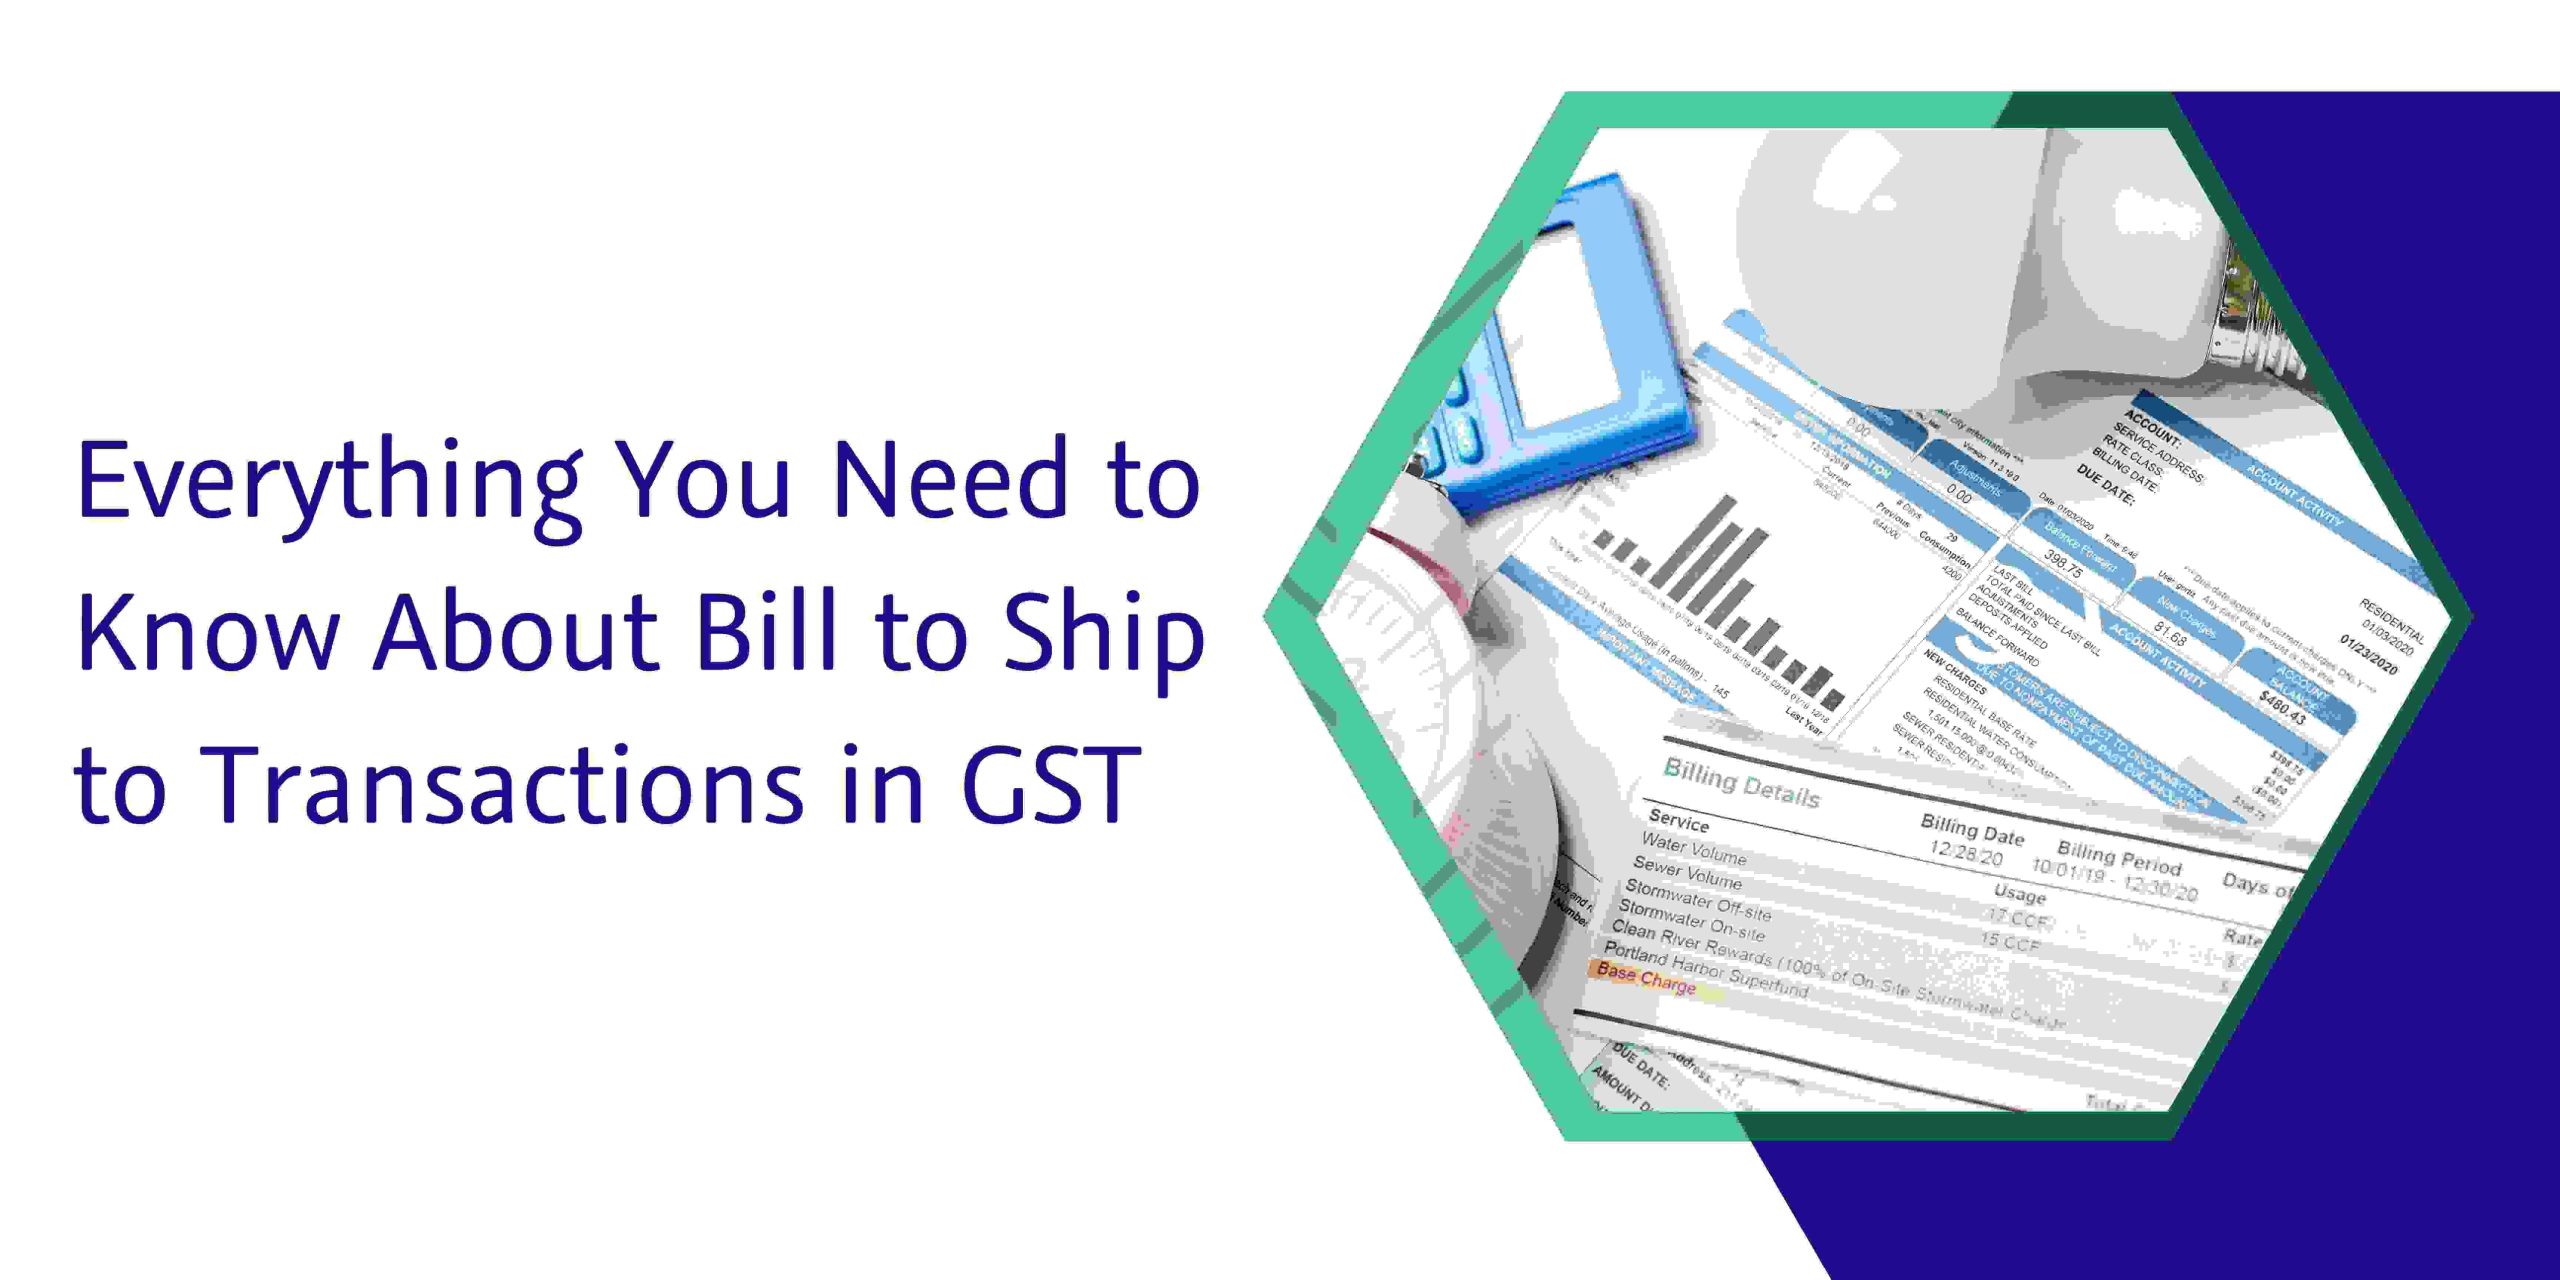 CaptainBiz: Everything You Need to Know About Bill to Ship to Transactions in GST